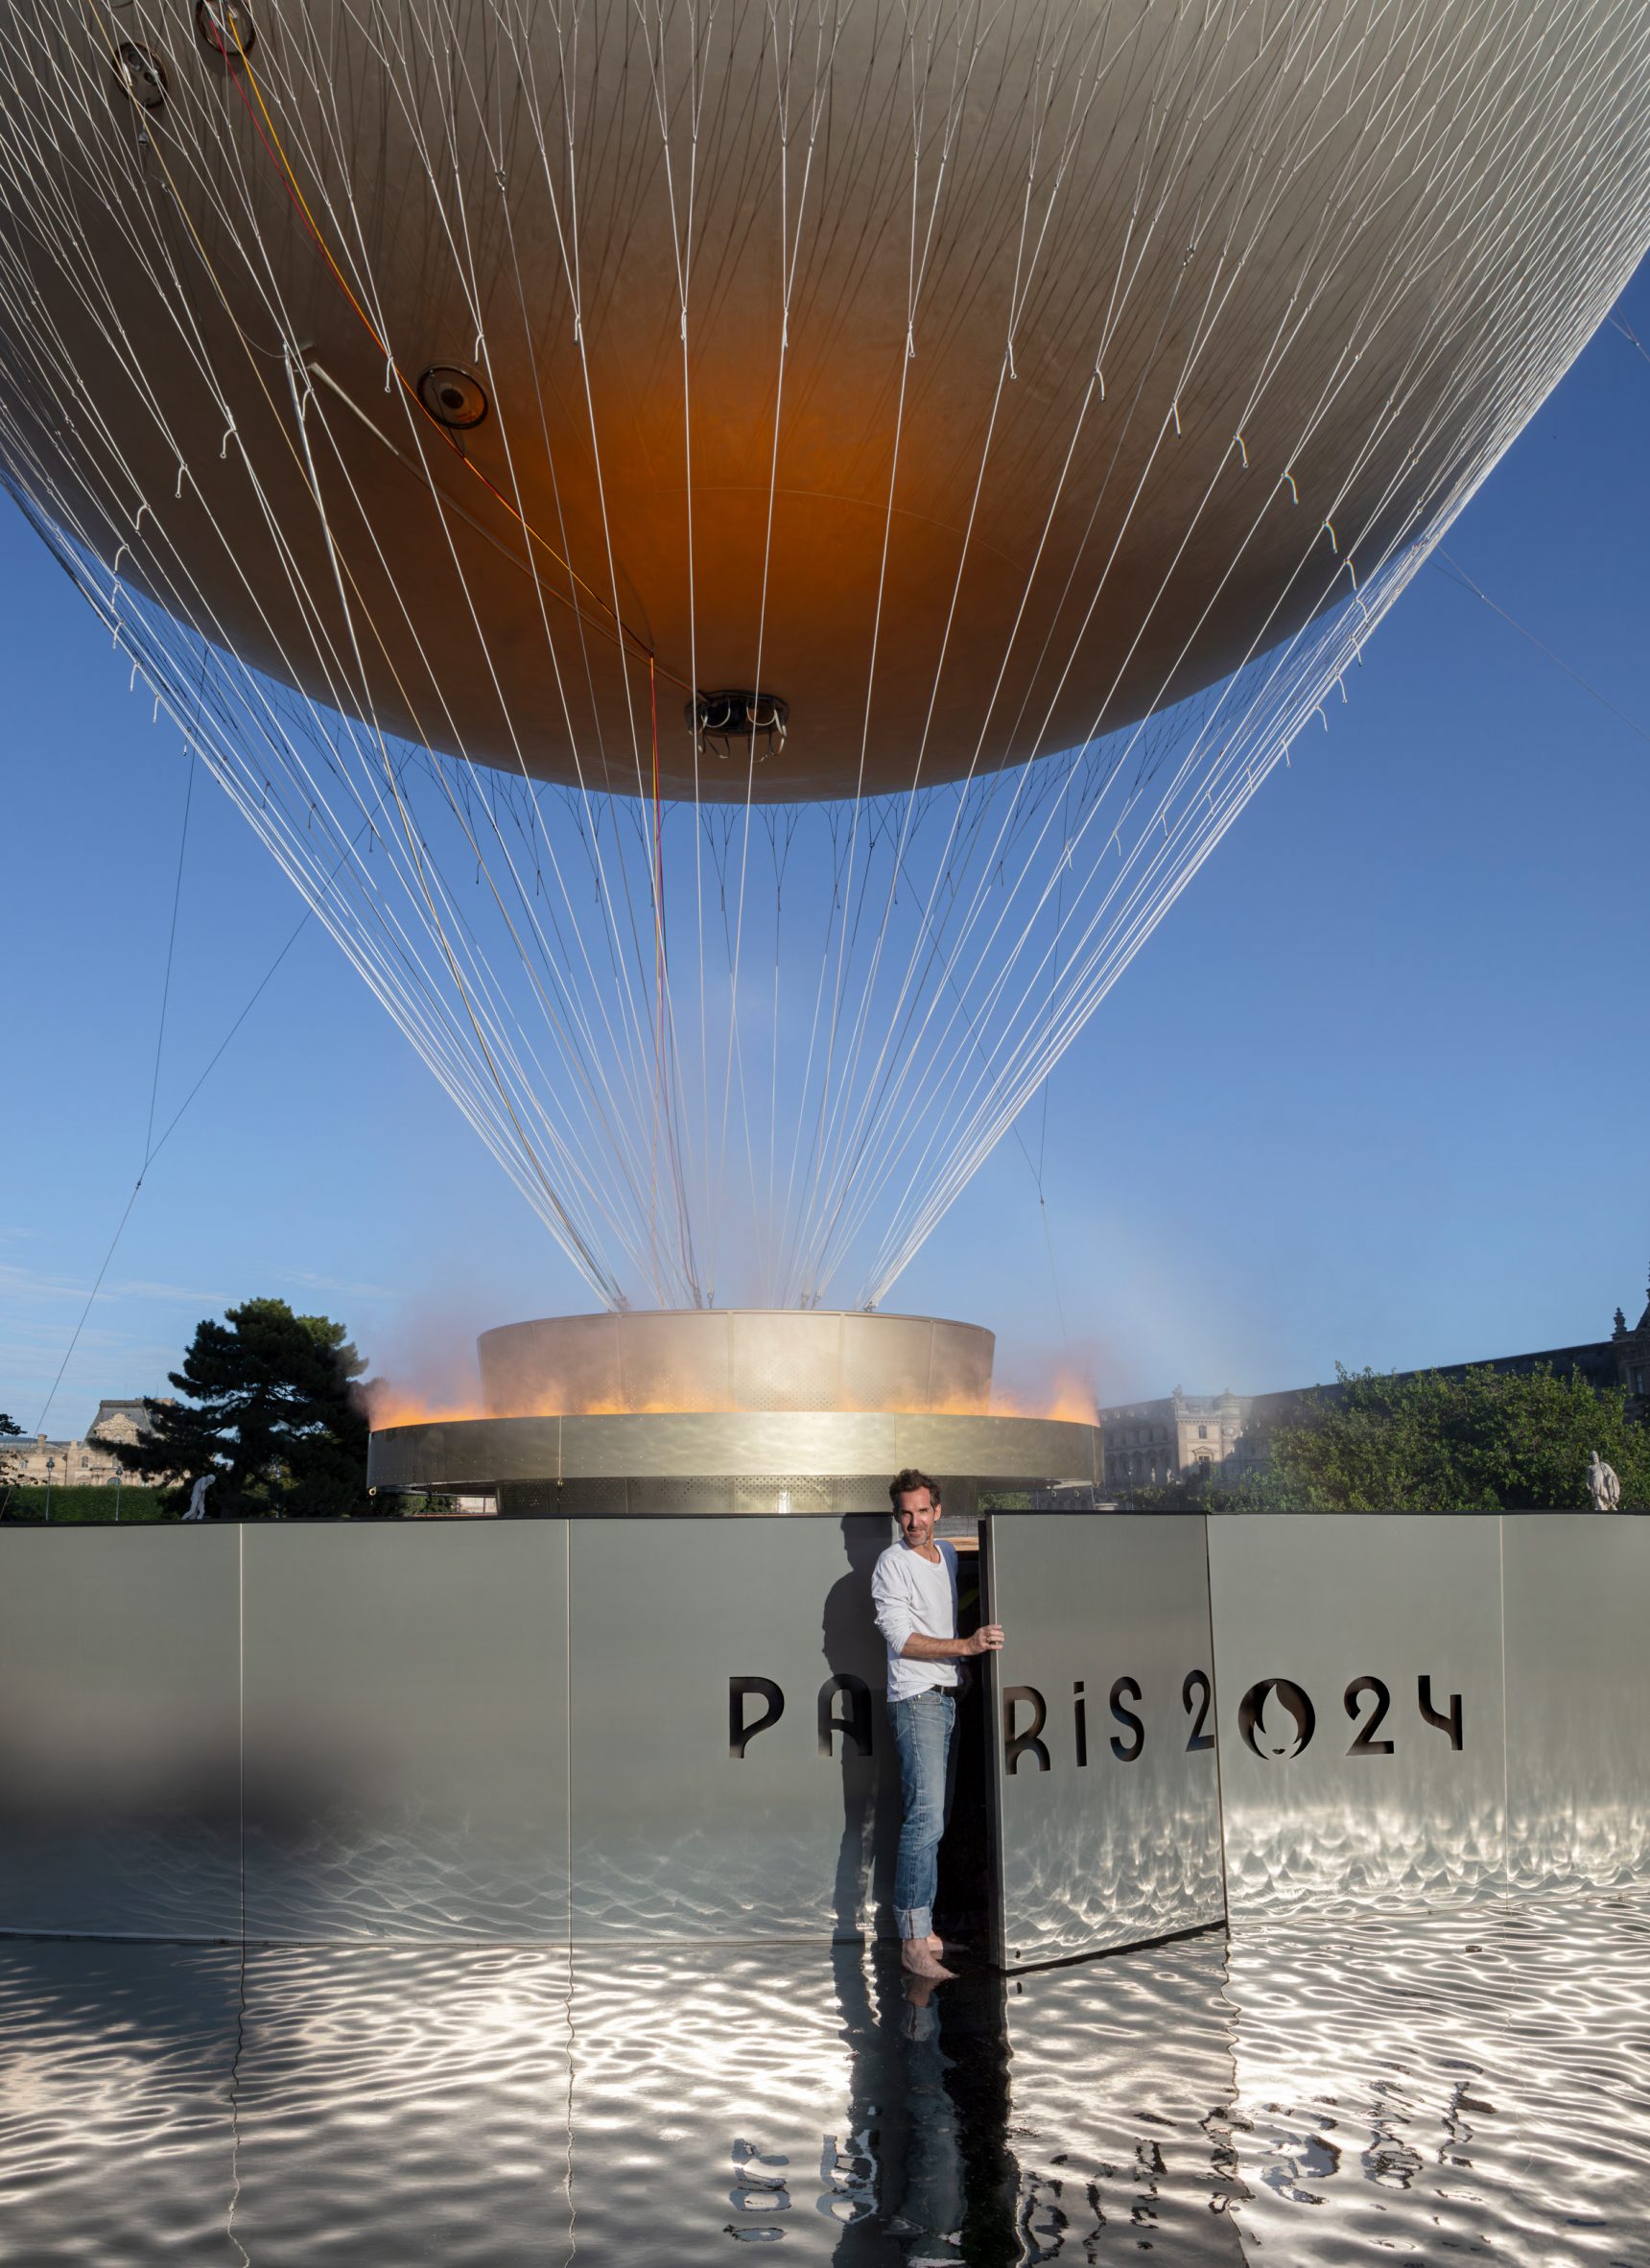 Designer Mathieu Lehanneur in front of Olympic balloon